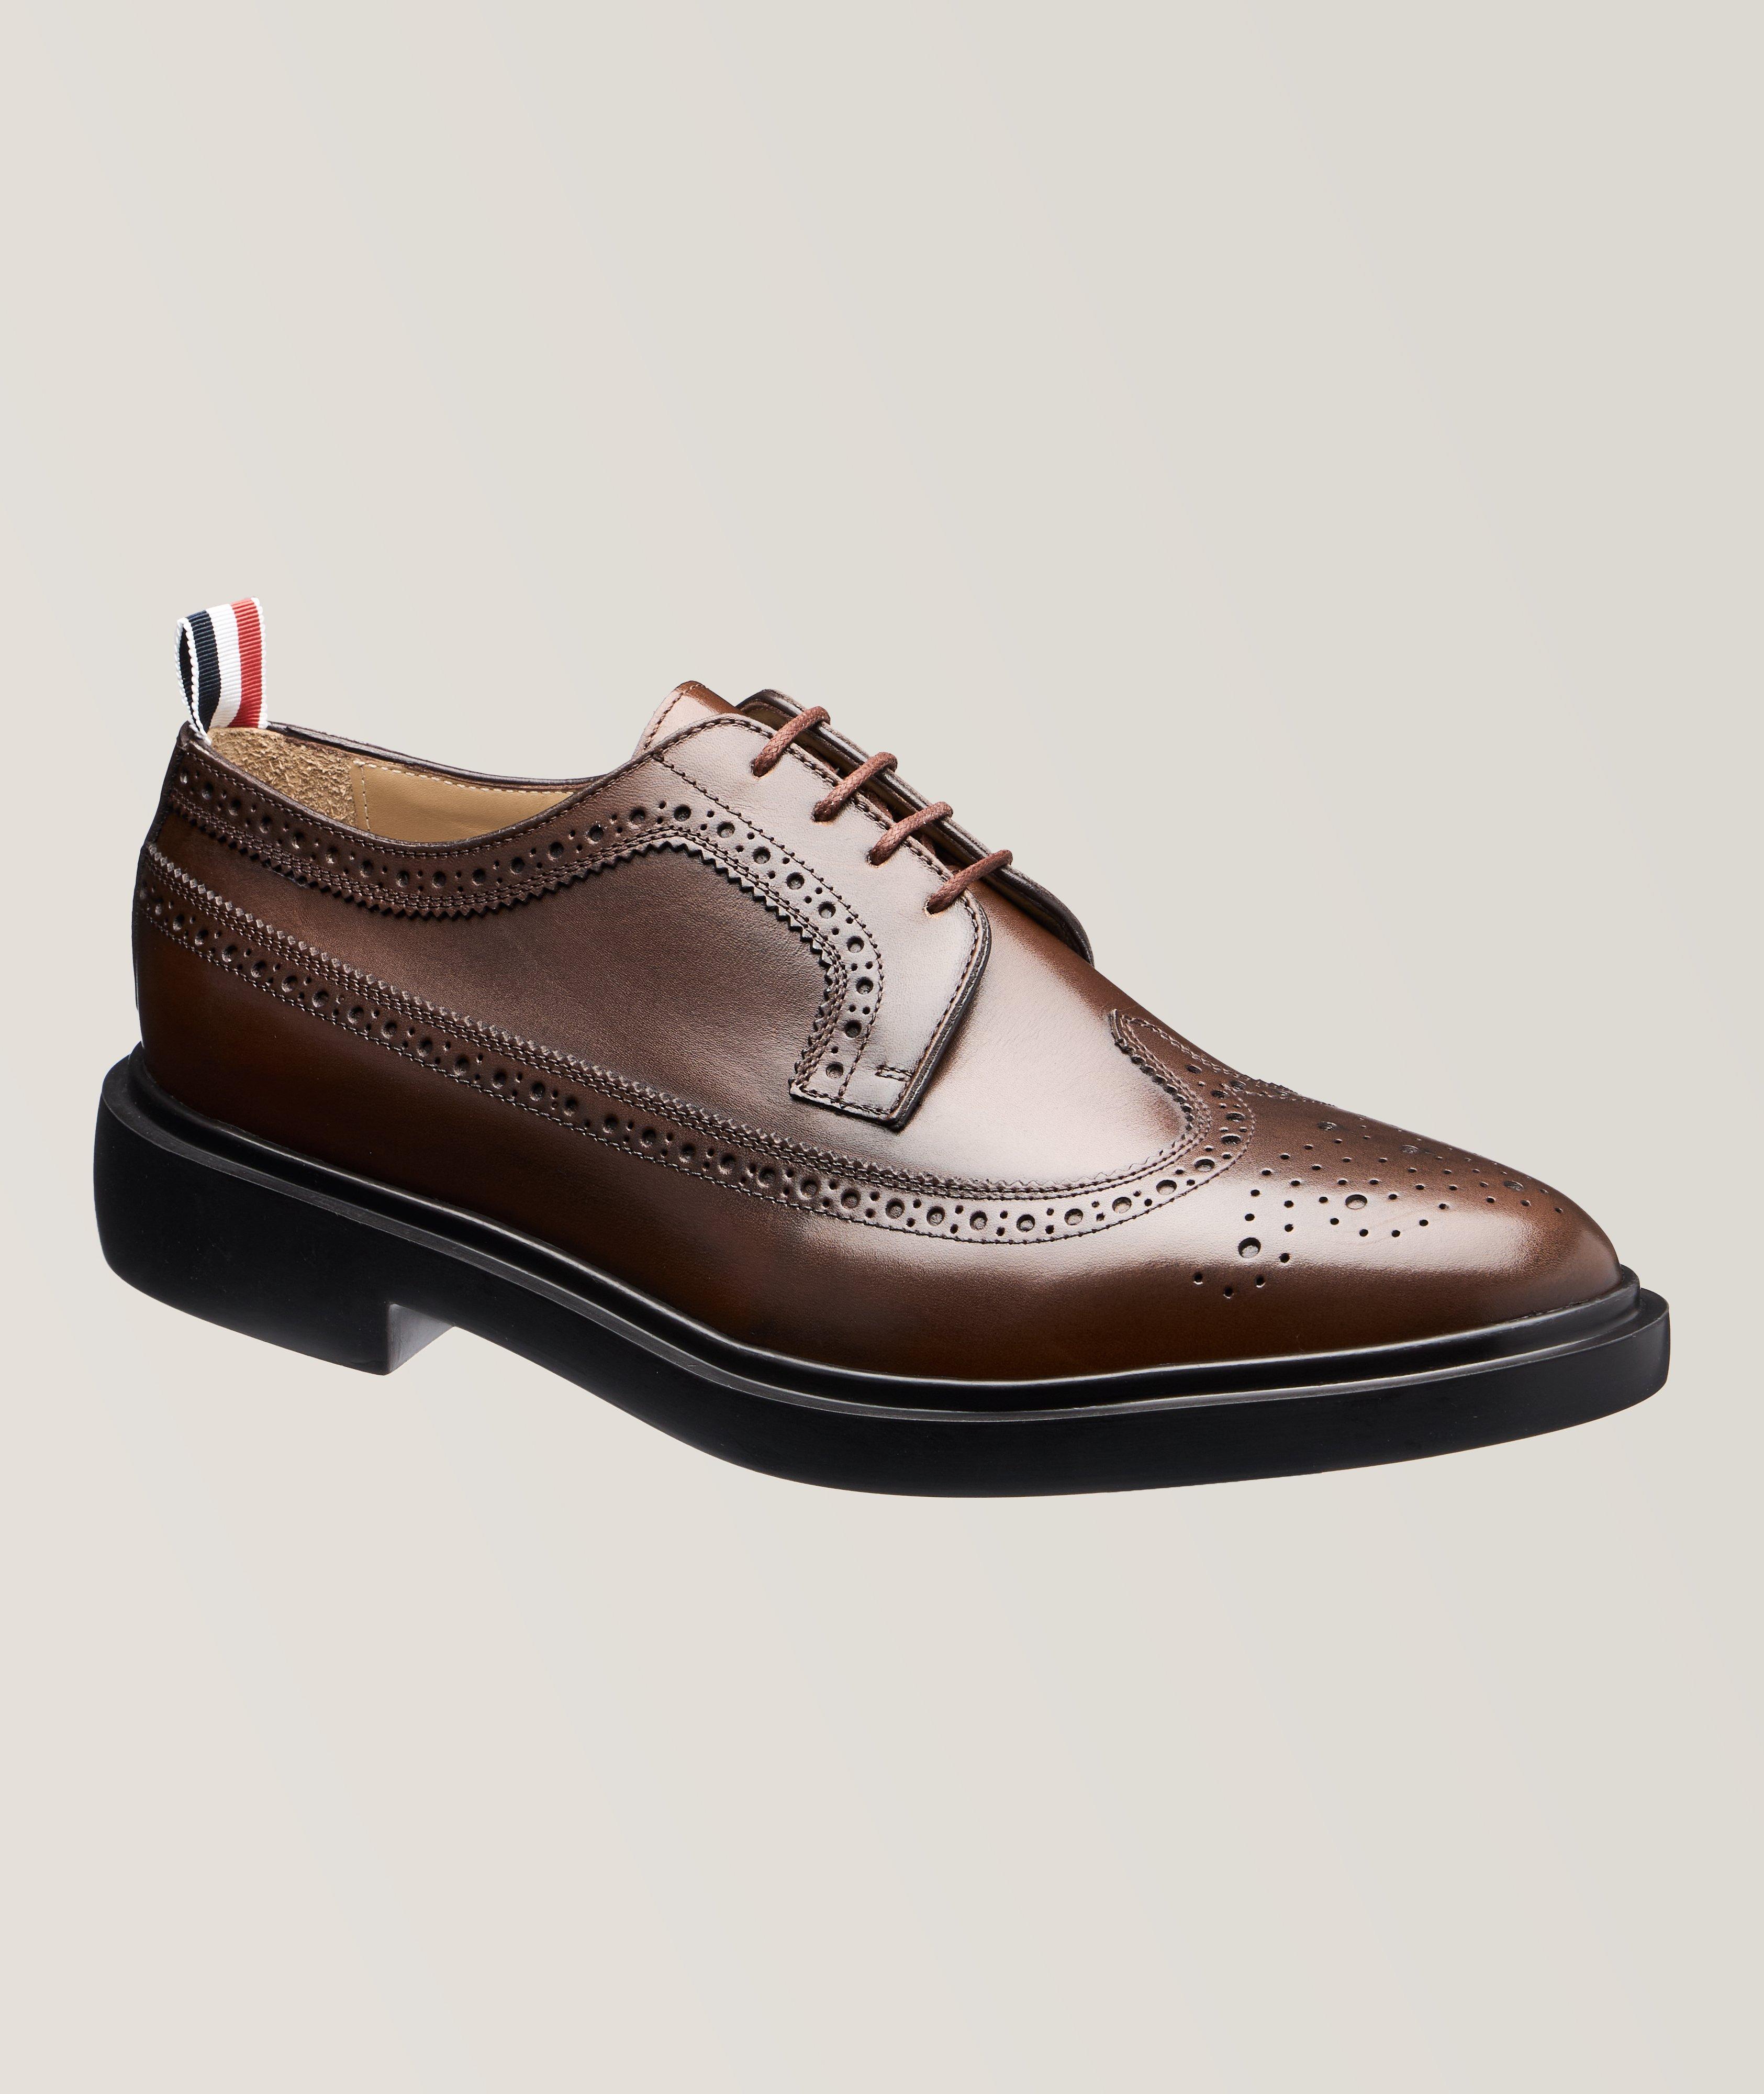 Thom Browne Pebbled Leather Longwing Brogues